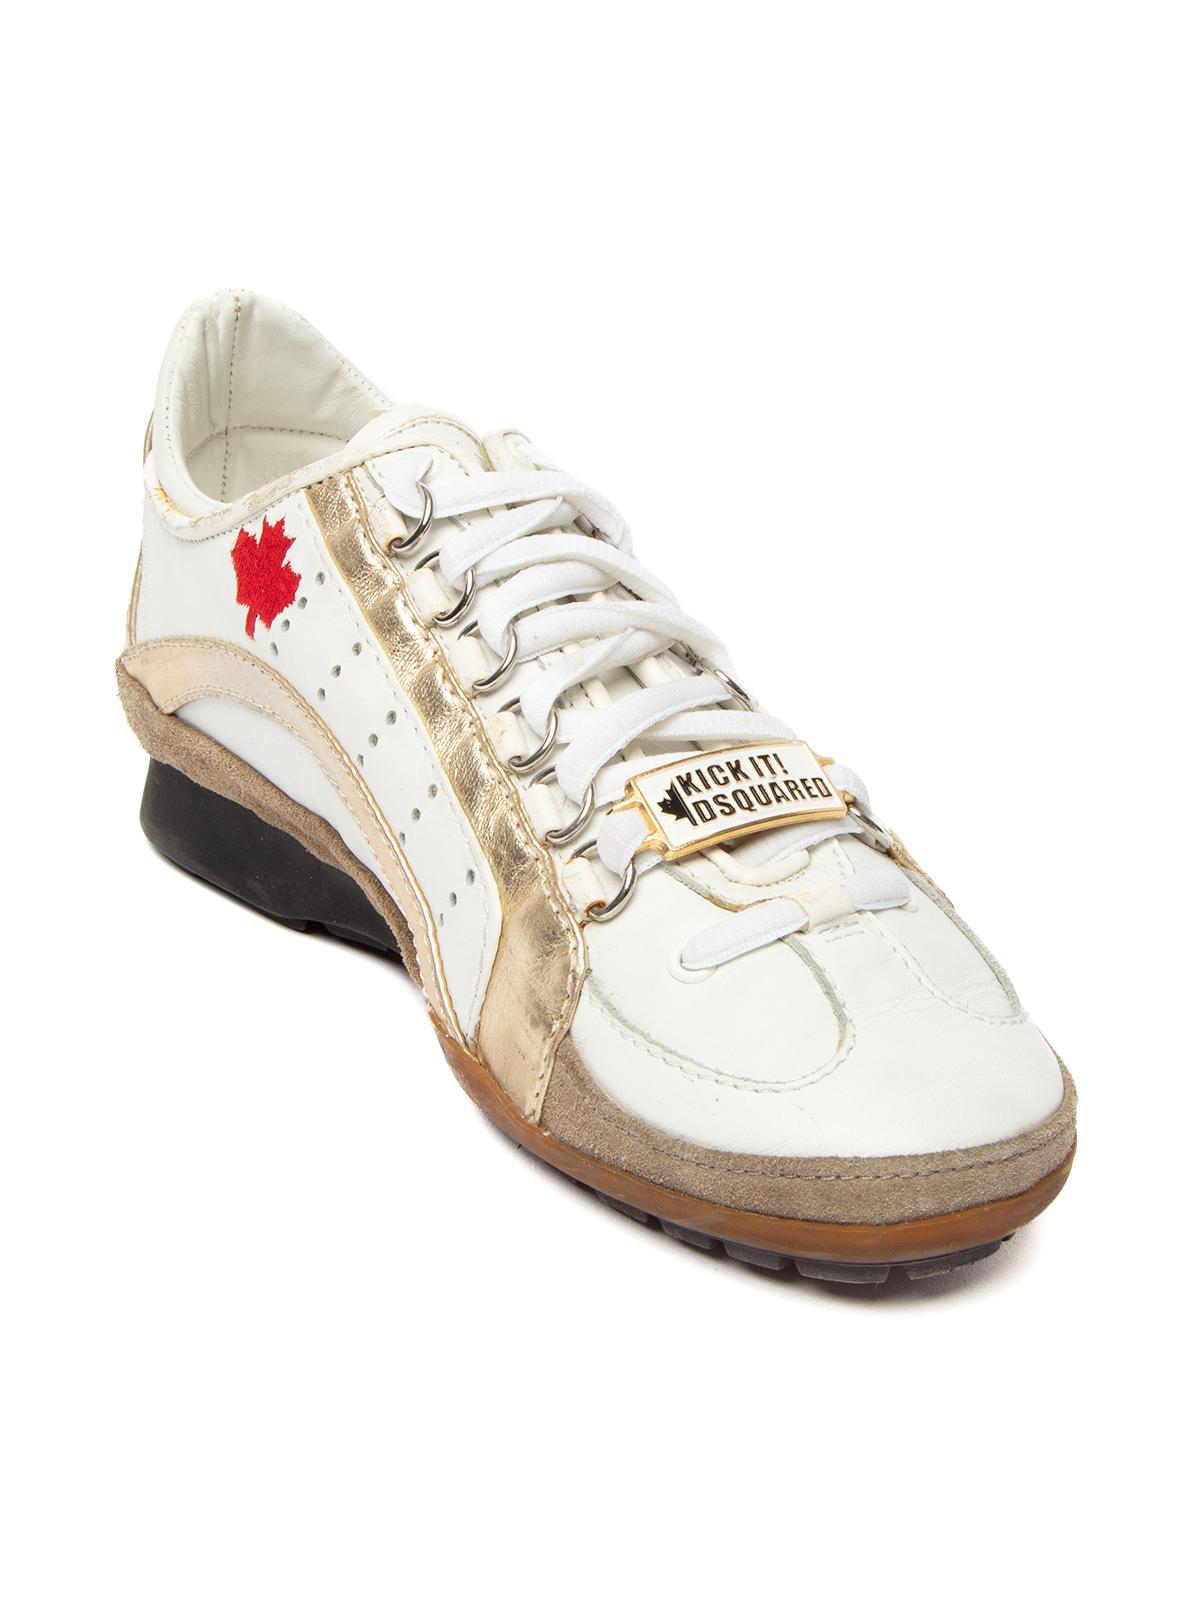 CONDITION is Good. General wear to sneakers is evident. Some scuff marks to exterior on this used DSquared2 designer resale item. Details Kick It! Colour - white, gold, grey Material - leather Style - low top Toe style - round Lace fastenings 1964